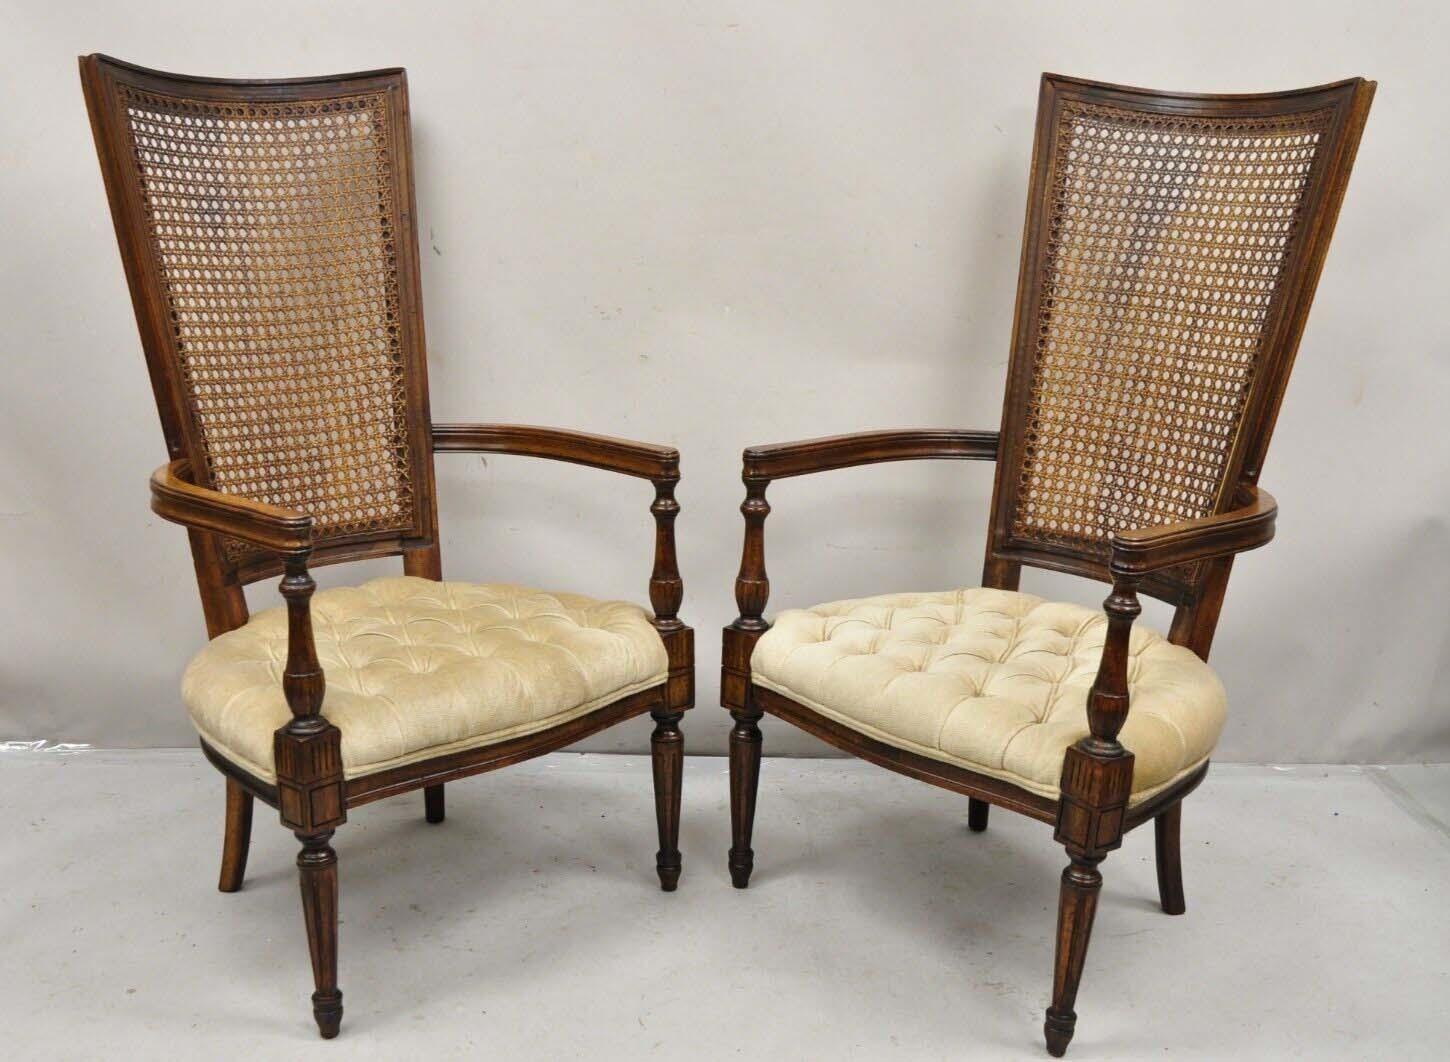 Vintage Hollywood Regency Tall Cane Back Fireside Lounge Armchairs - a Pair. Circa Mitte des 20. Jahrhunderts. Abmessungen: 47